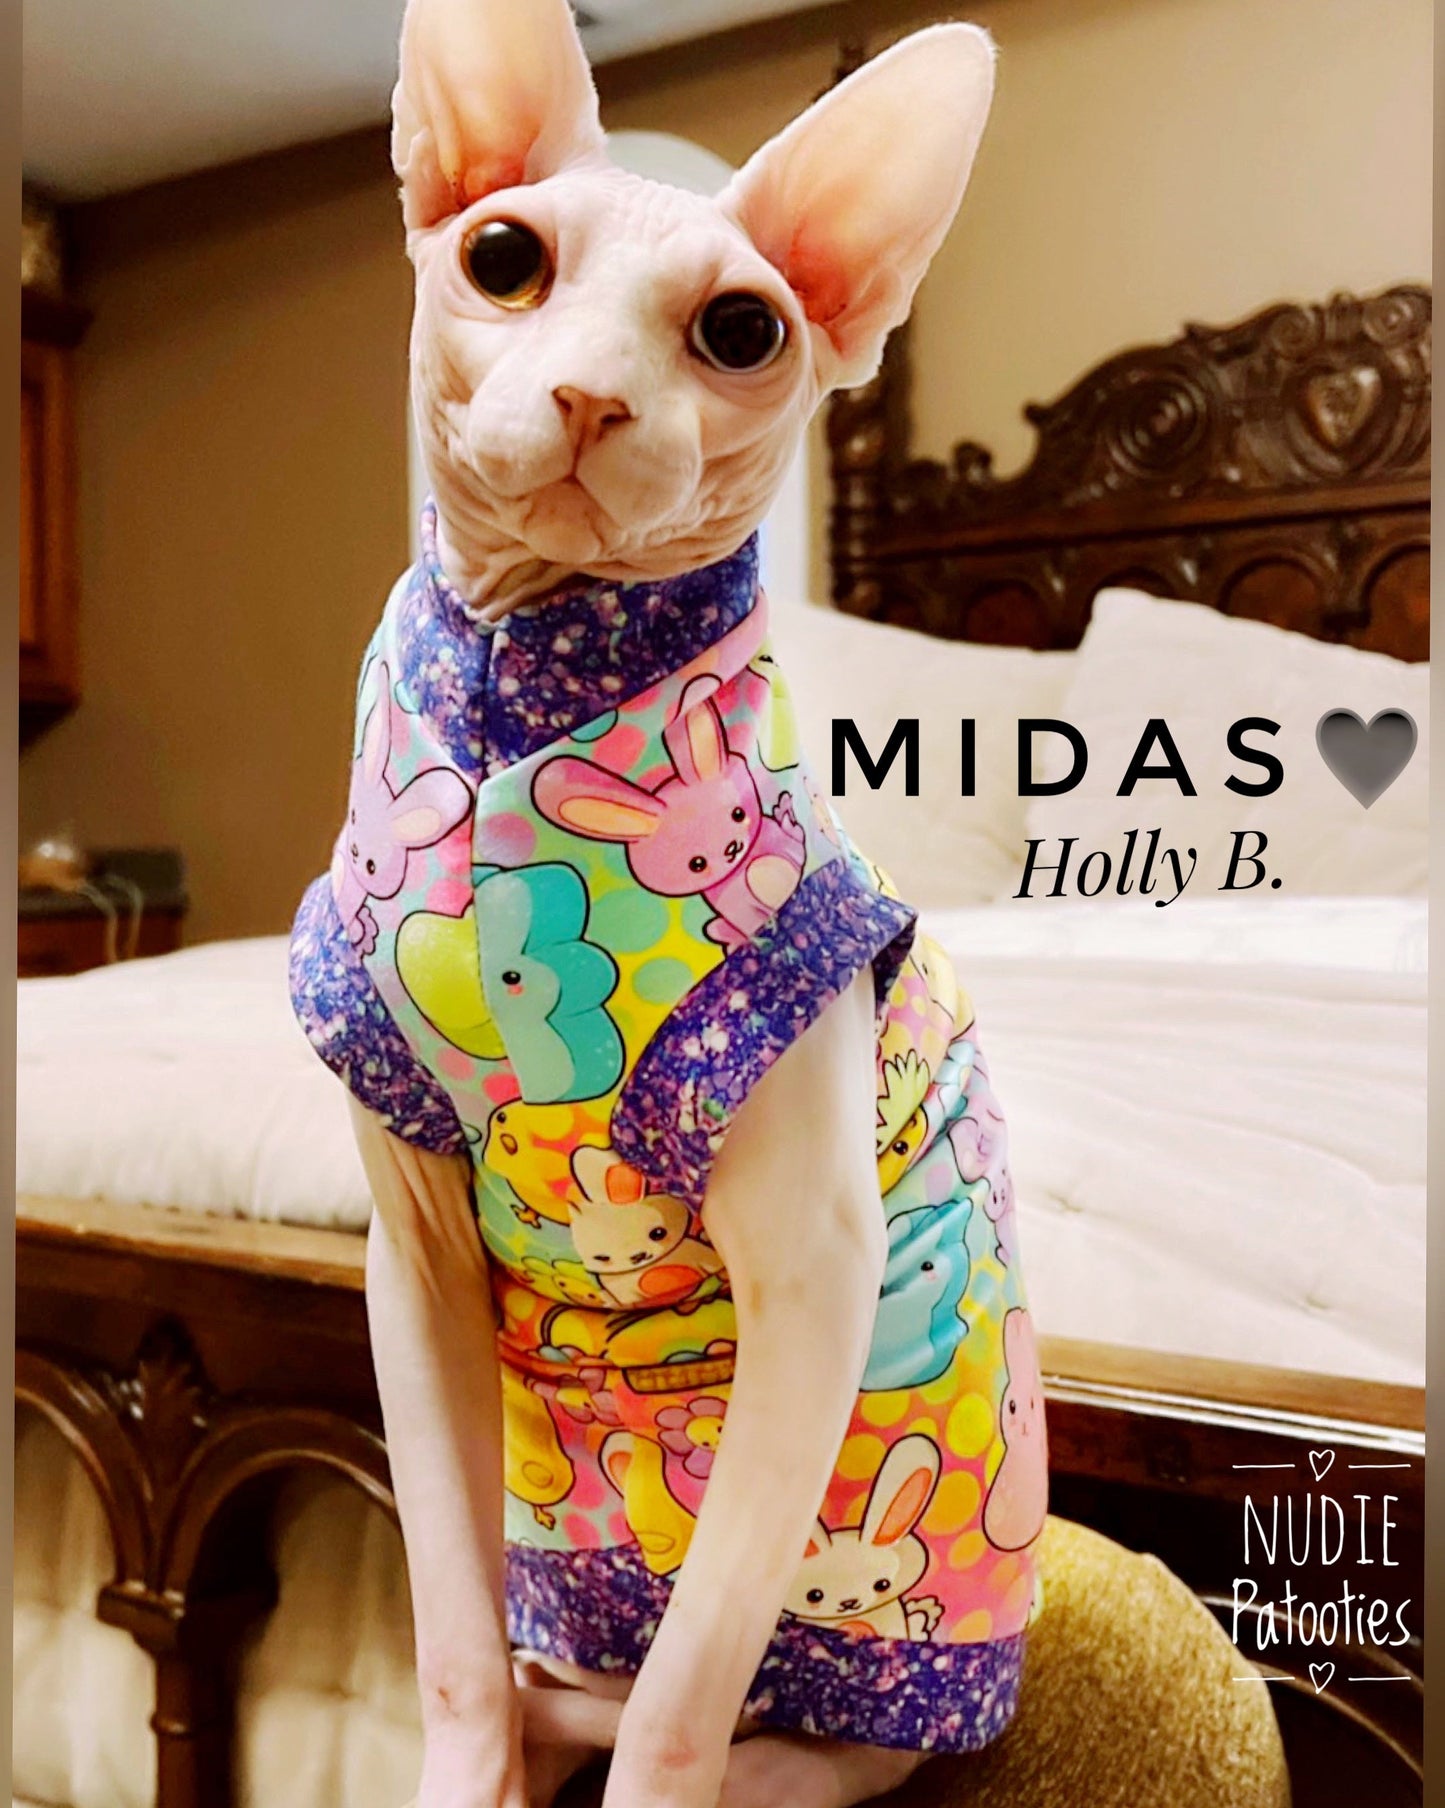 Sphynx cat and kitten shirt. Sphynx cat clothes.